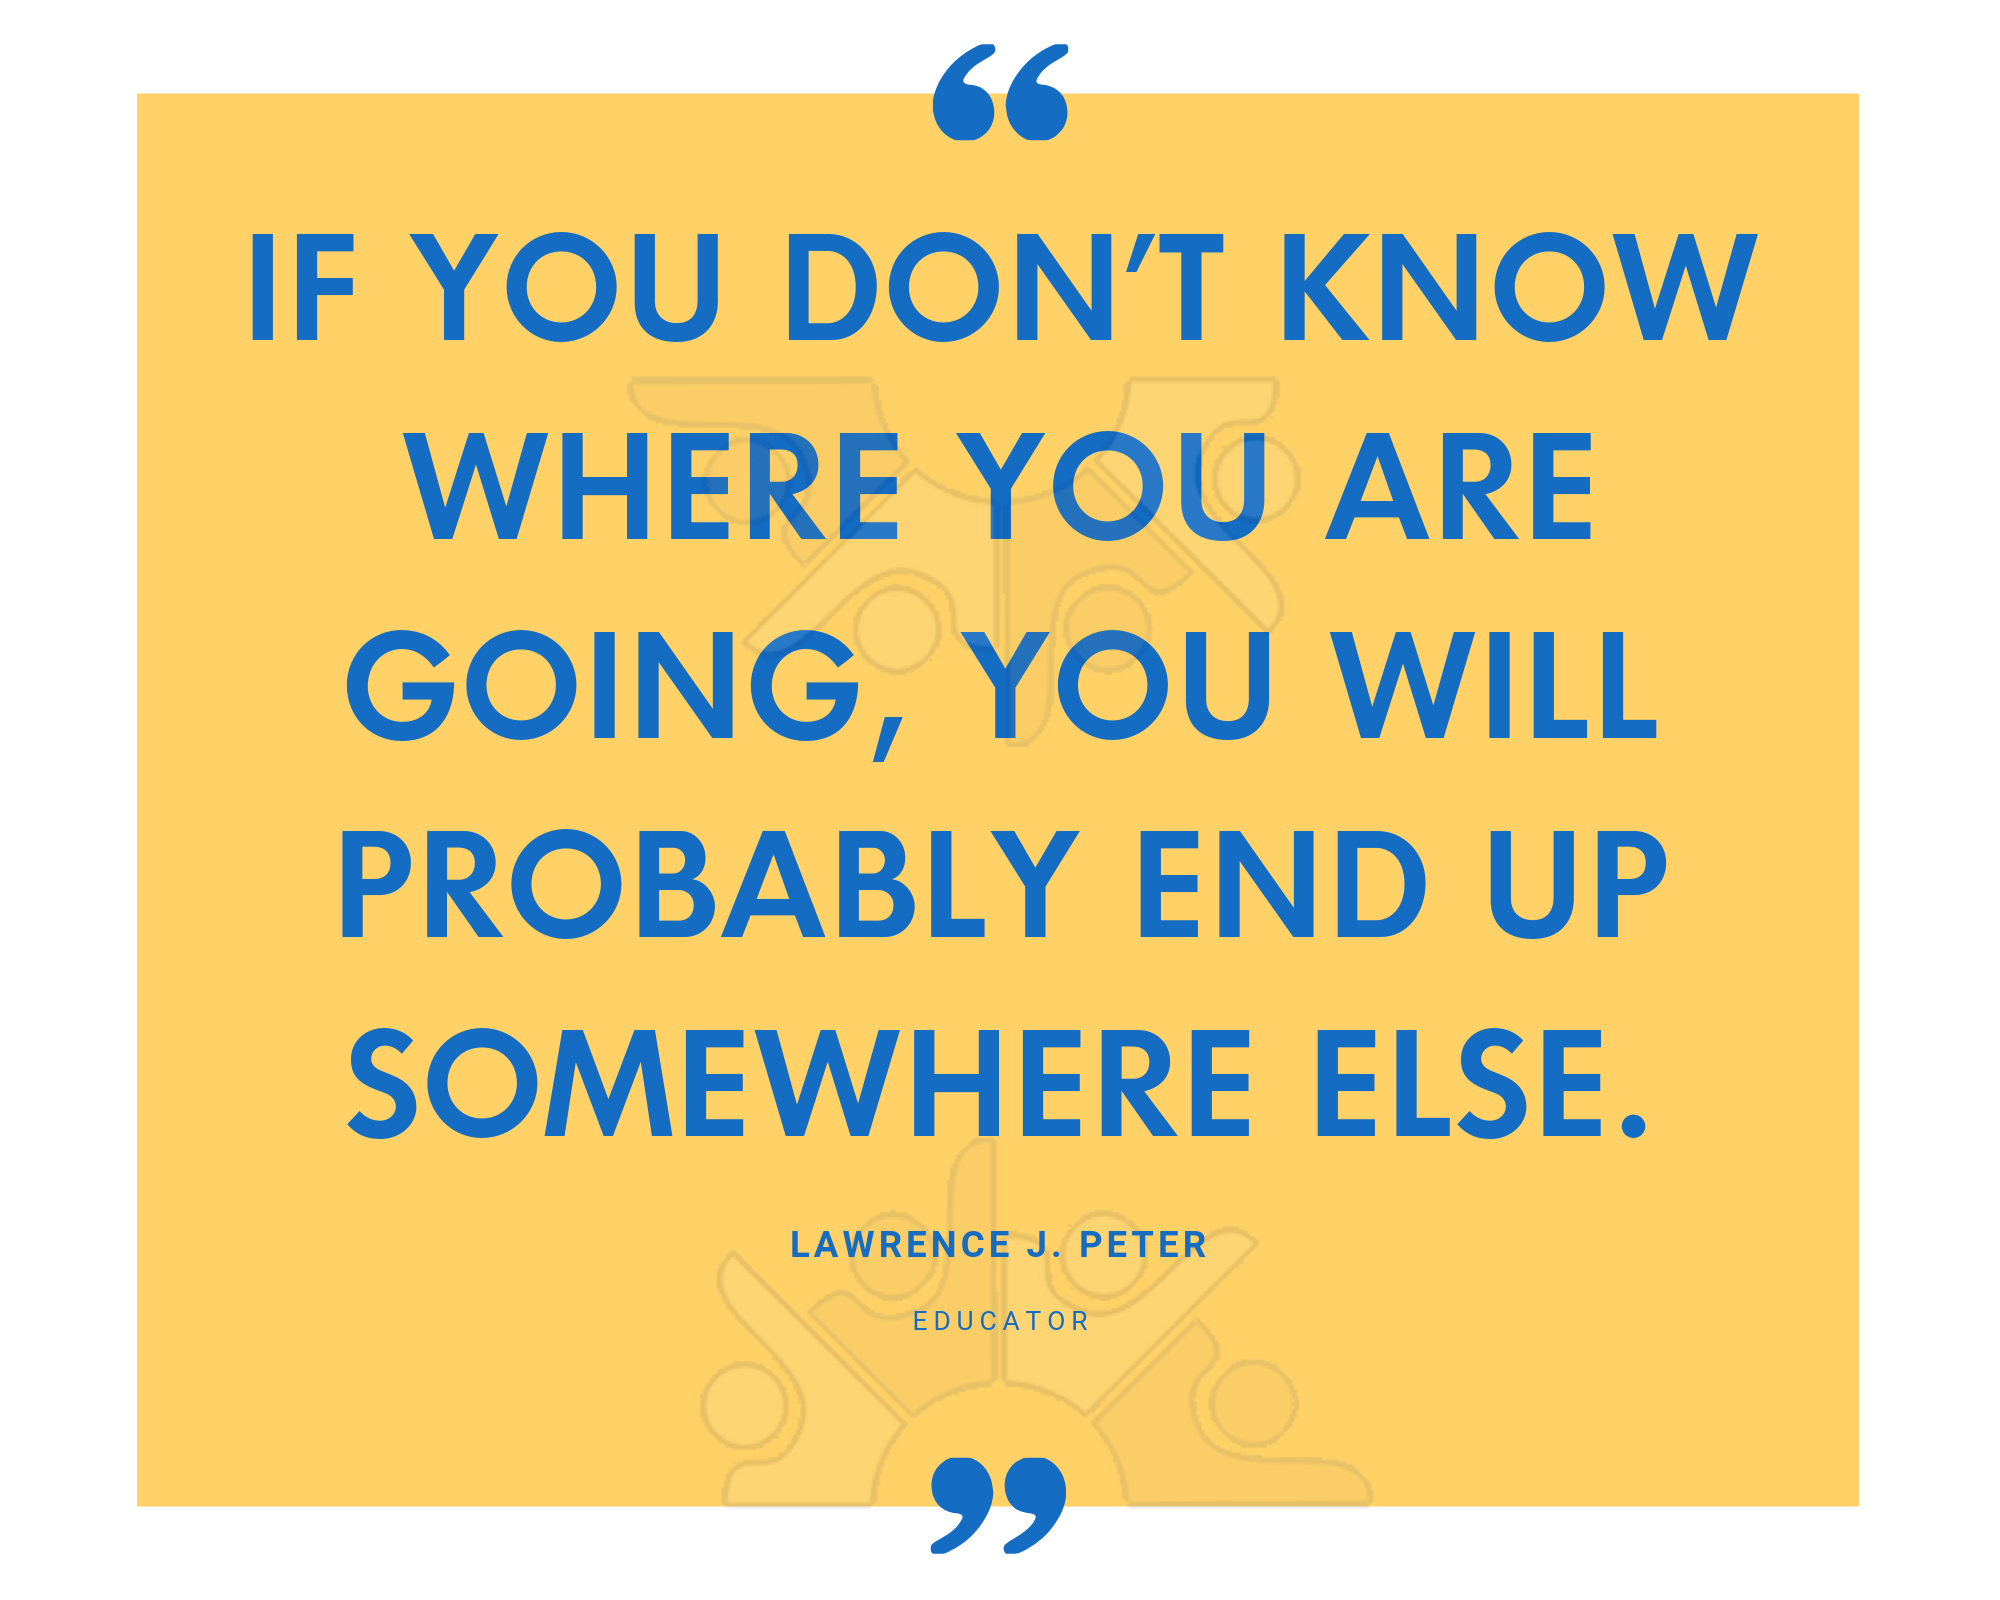 If you don’t know where you are going, you will probably end up somewhere else.